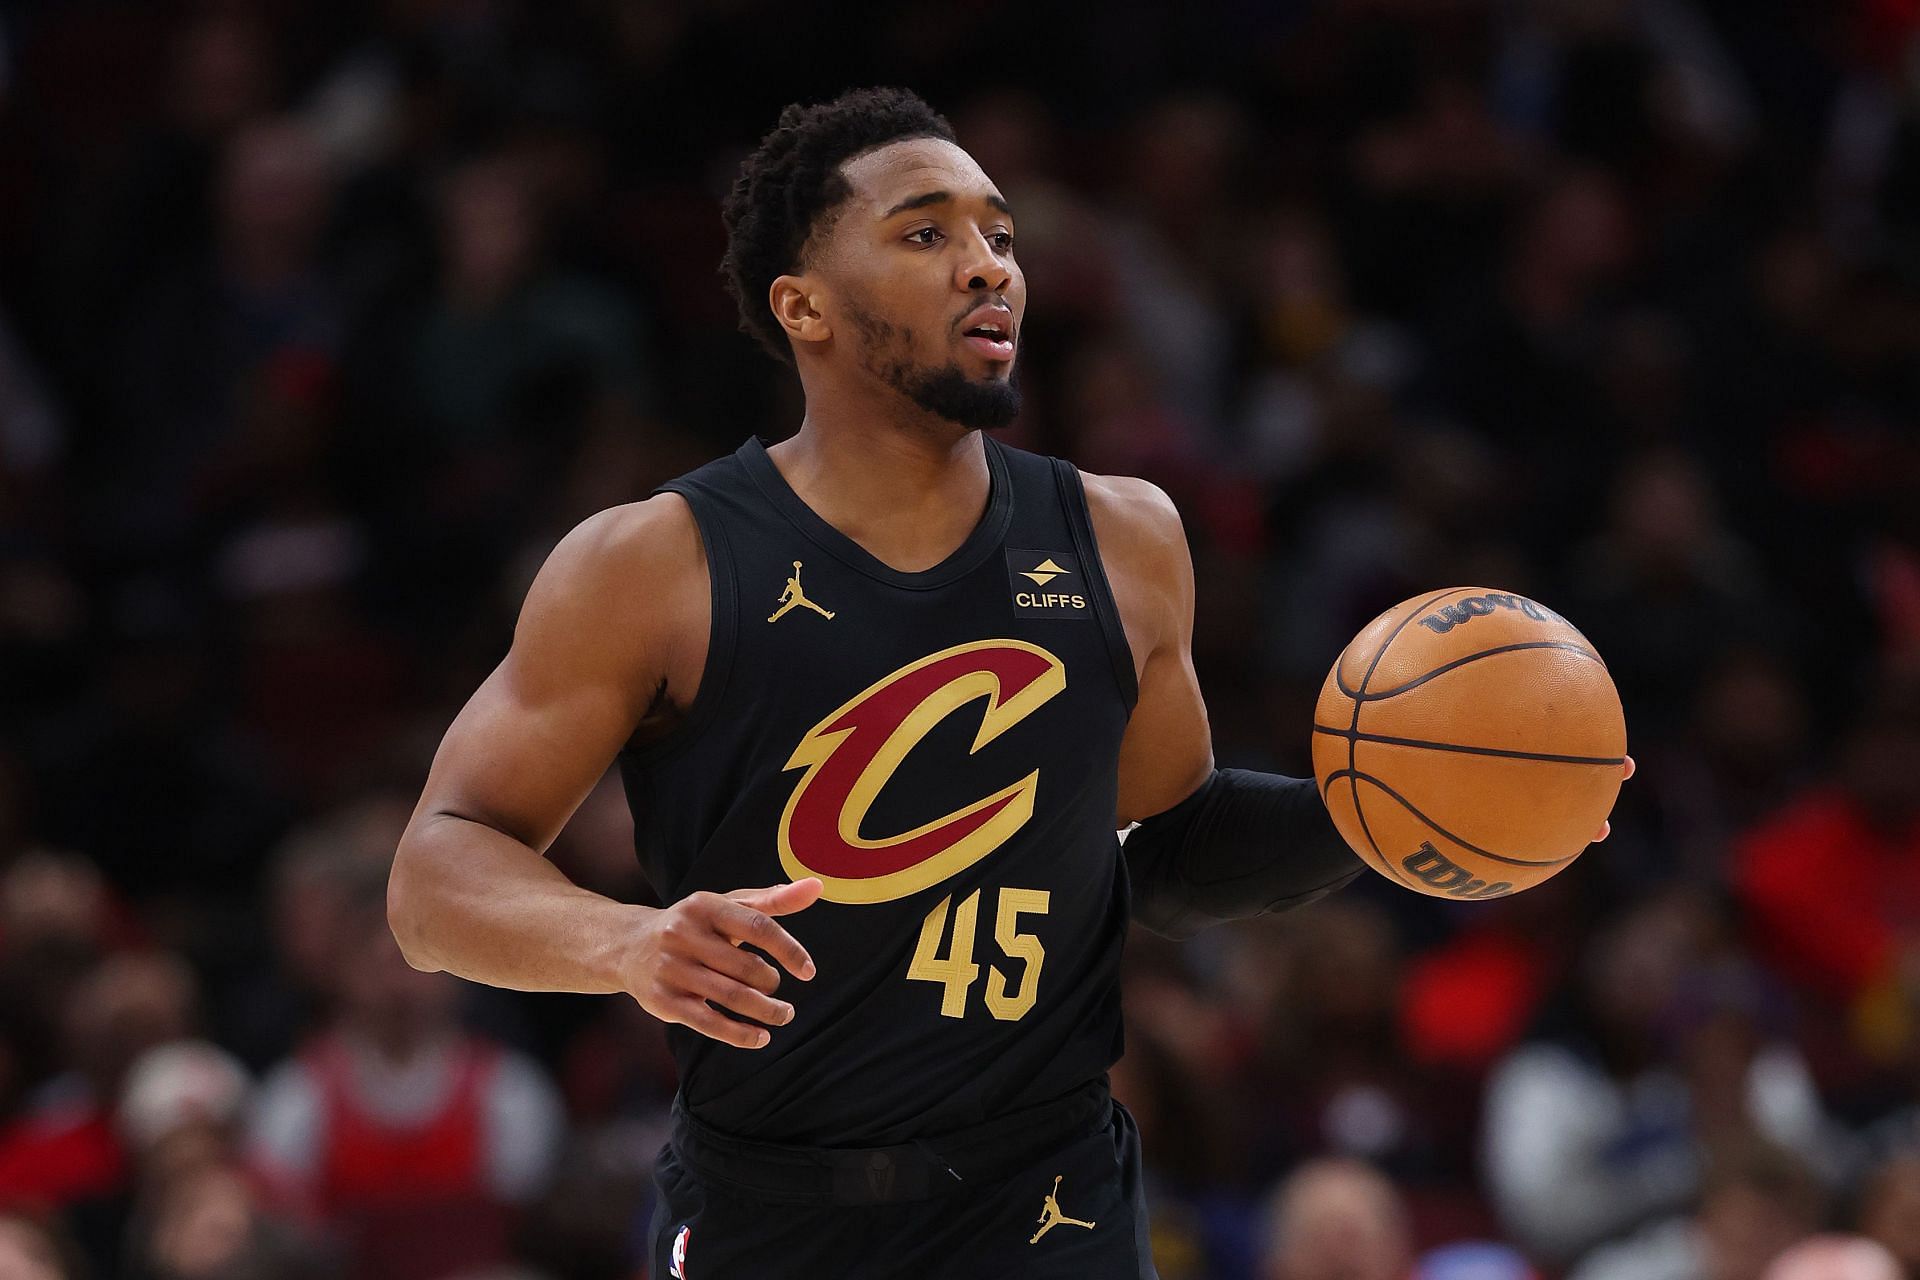 Cleveland Cavaliers star shooting guard Donovan Mitchell